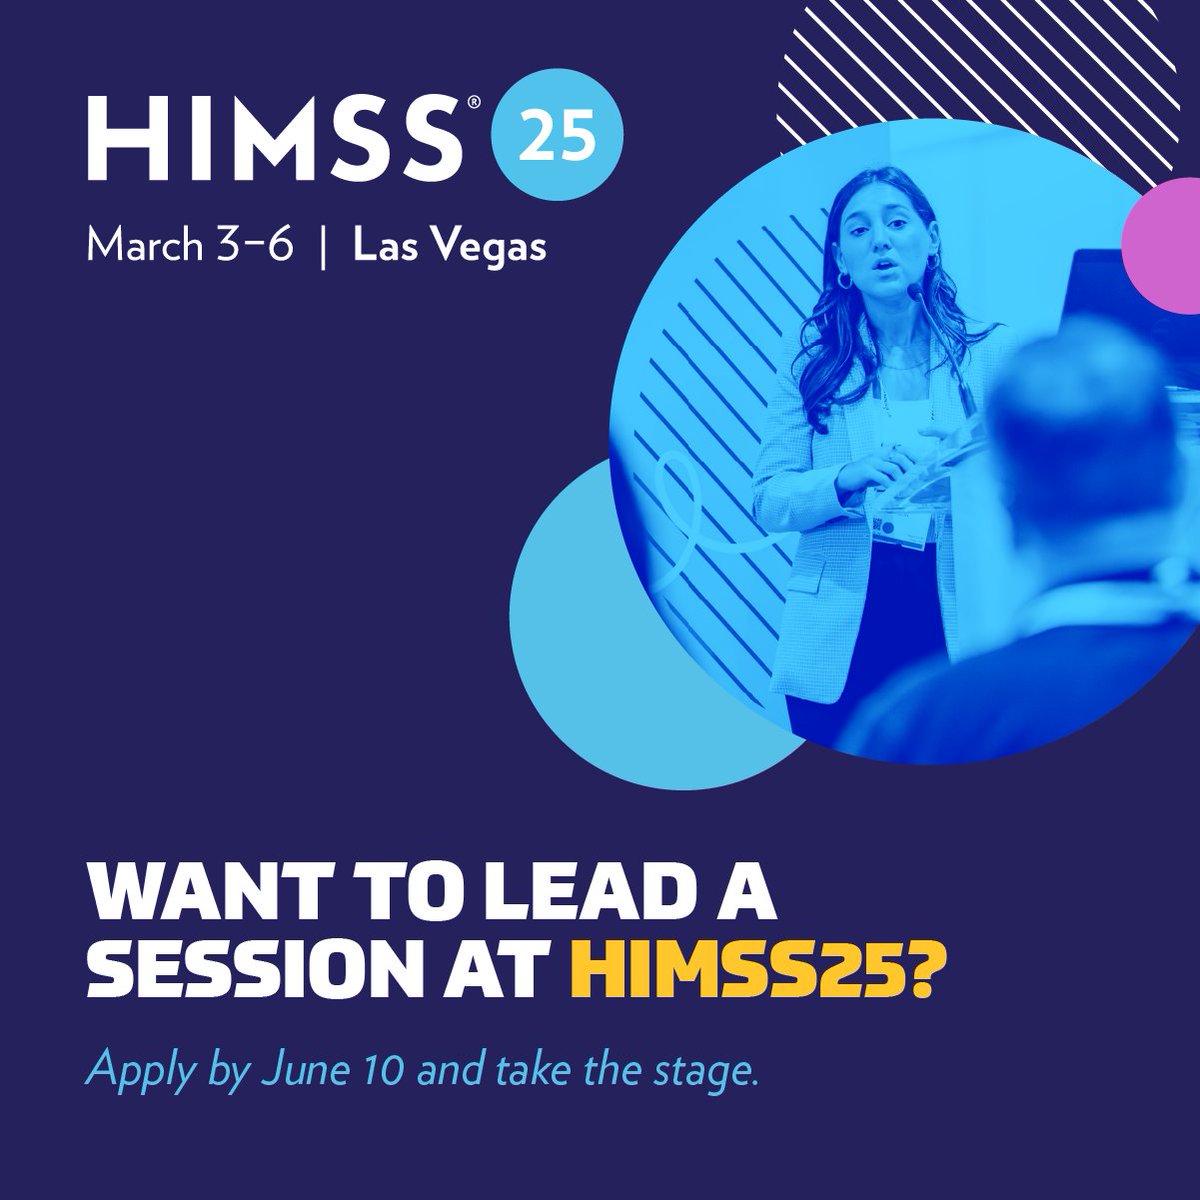 Reminder to submit your proposal to lead a session at #HIMSS25! Don't miss out on the chance to showcase your expertise at the world's biggest health tech conference. Deadline is June 10th! Details here: bit.ly/44C61c8